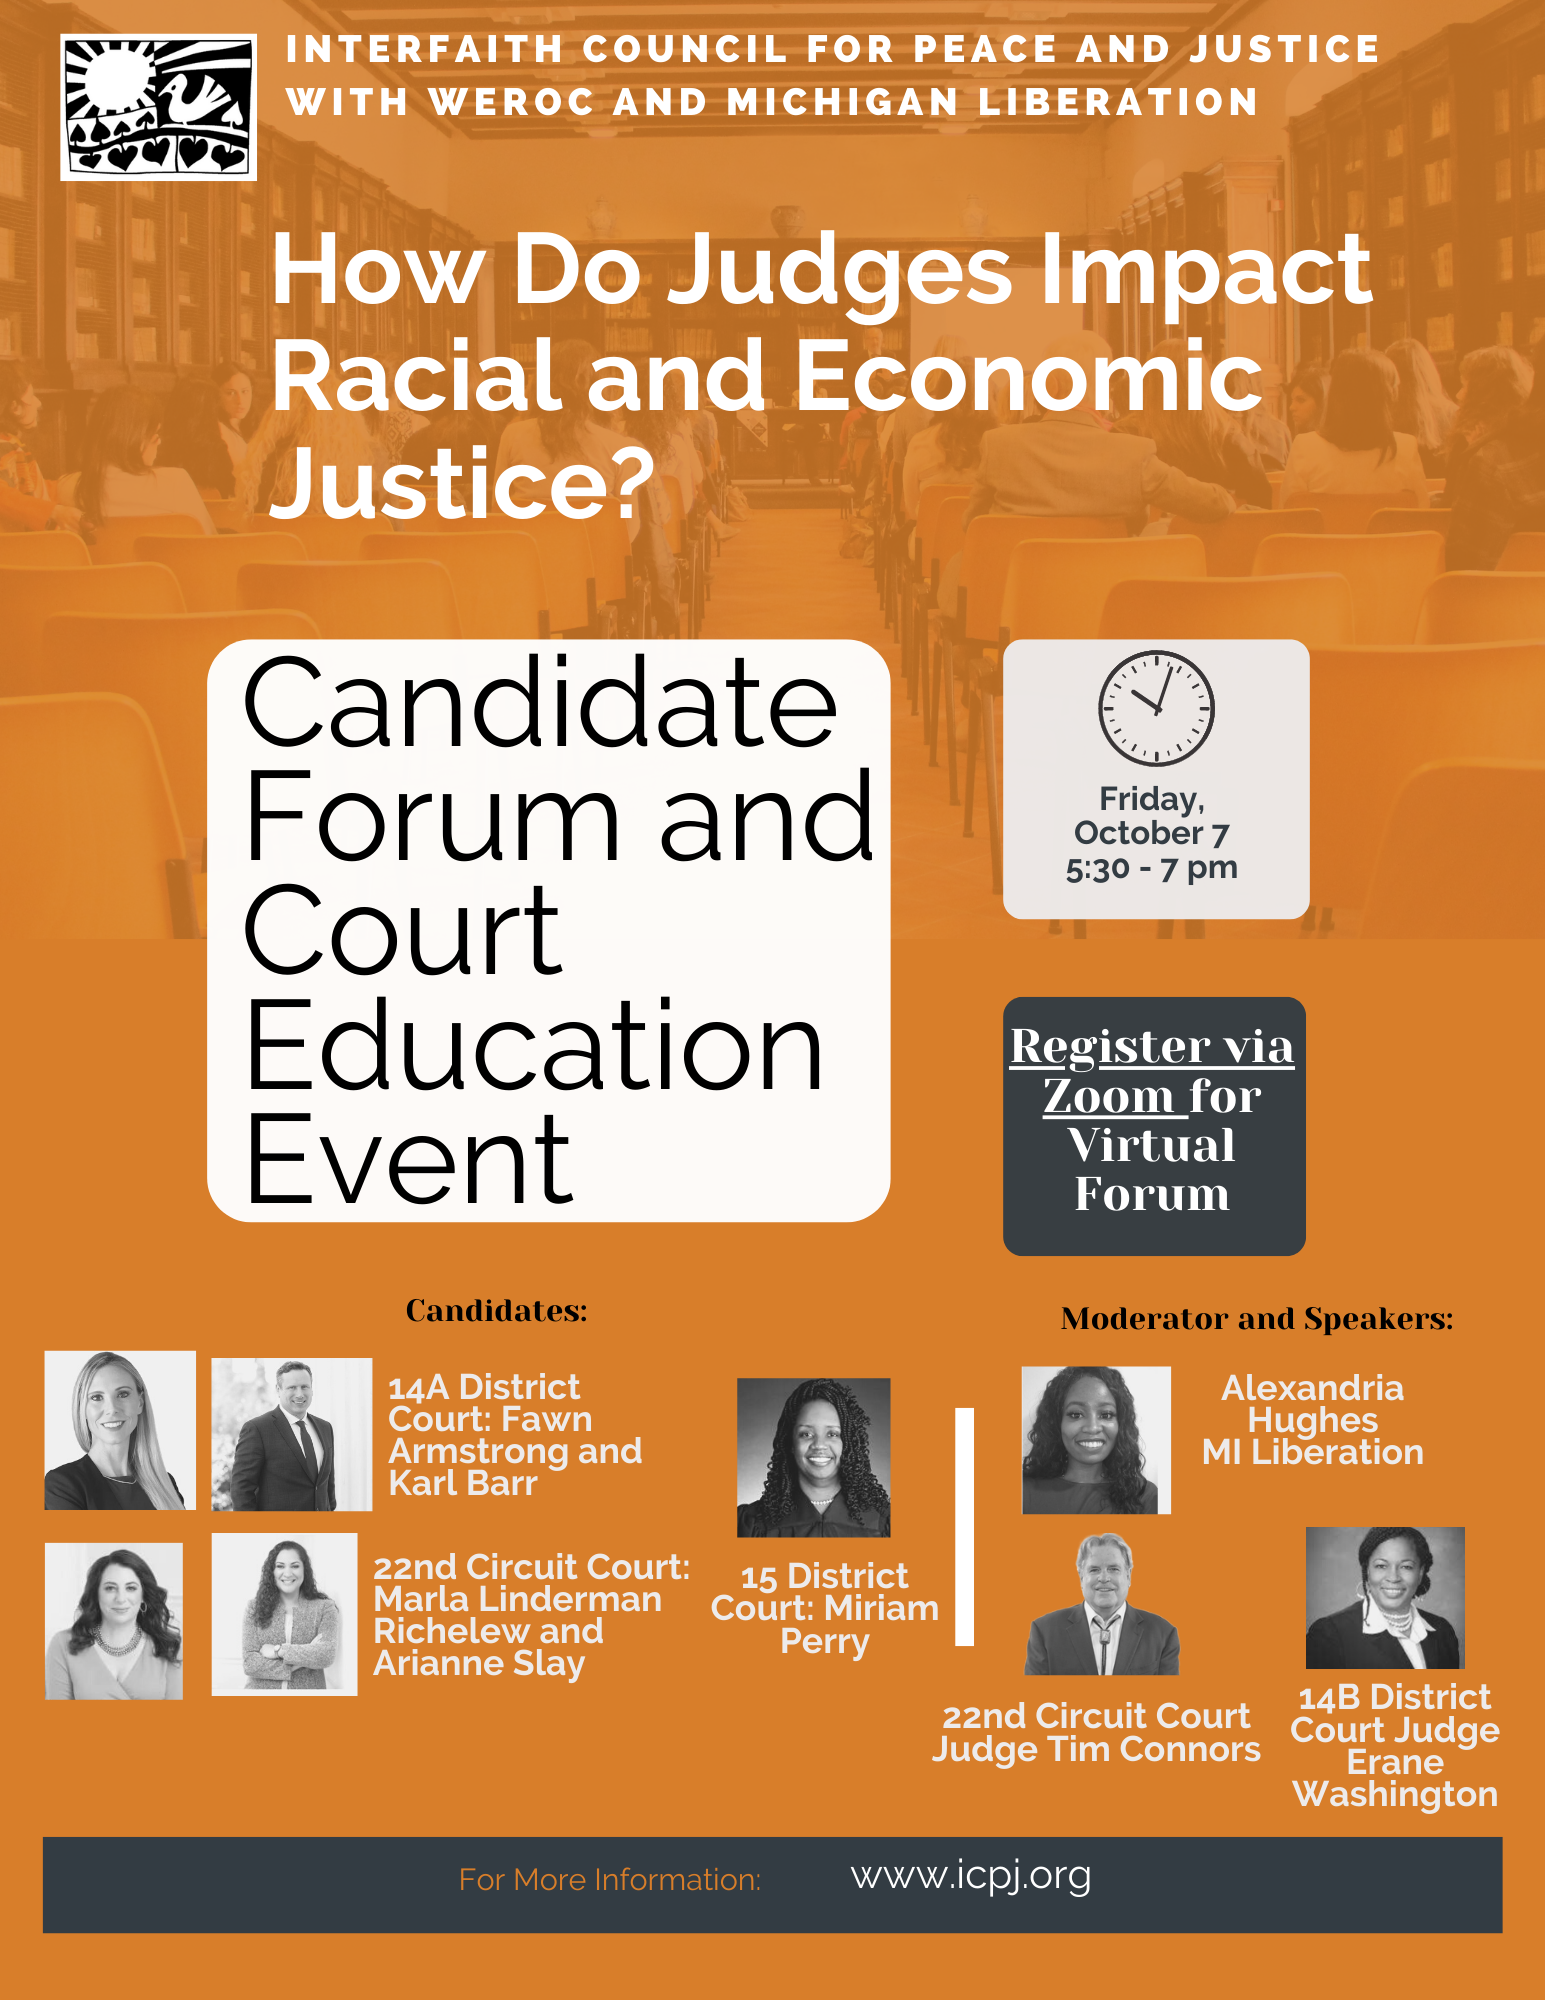 How Do Judges Impact Racial and Economic Justice?